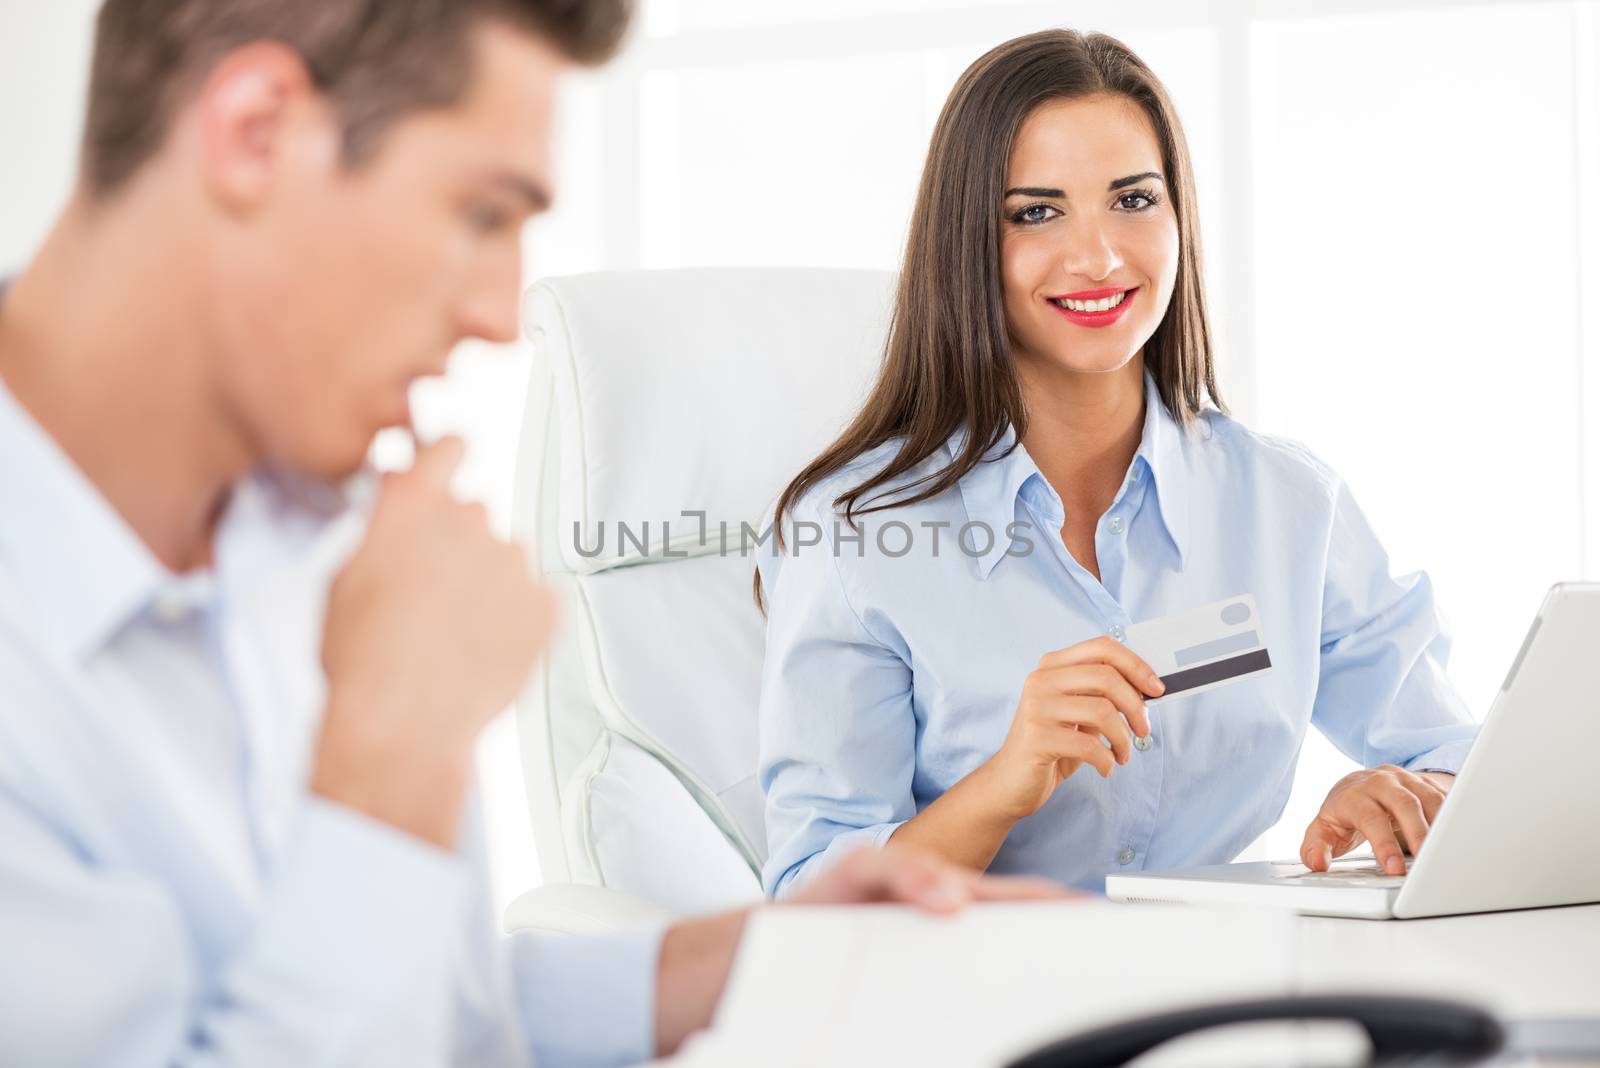 Young business people, woman and man, sitting in an office, a young businesswoman which is in the foreground holding a credit card and with a smile looking at the camera.